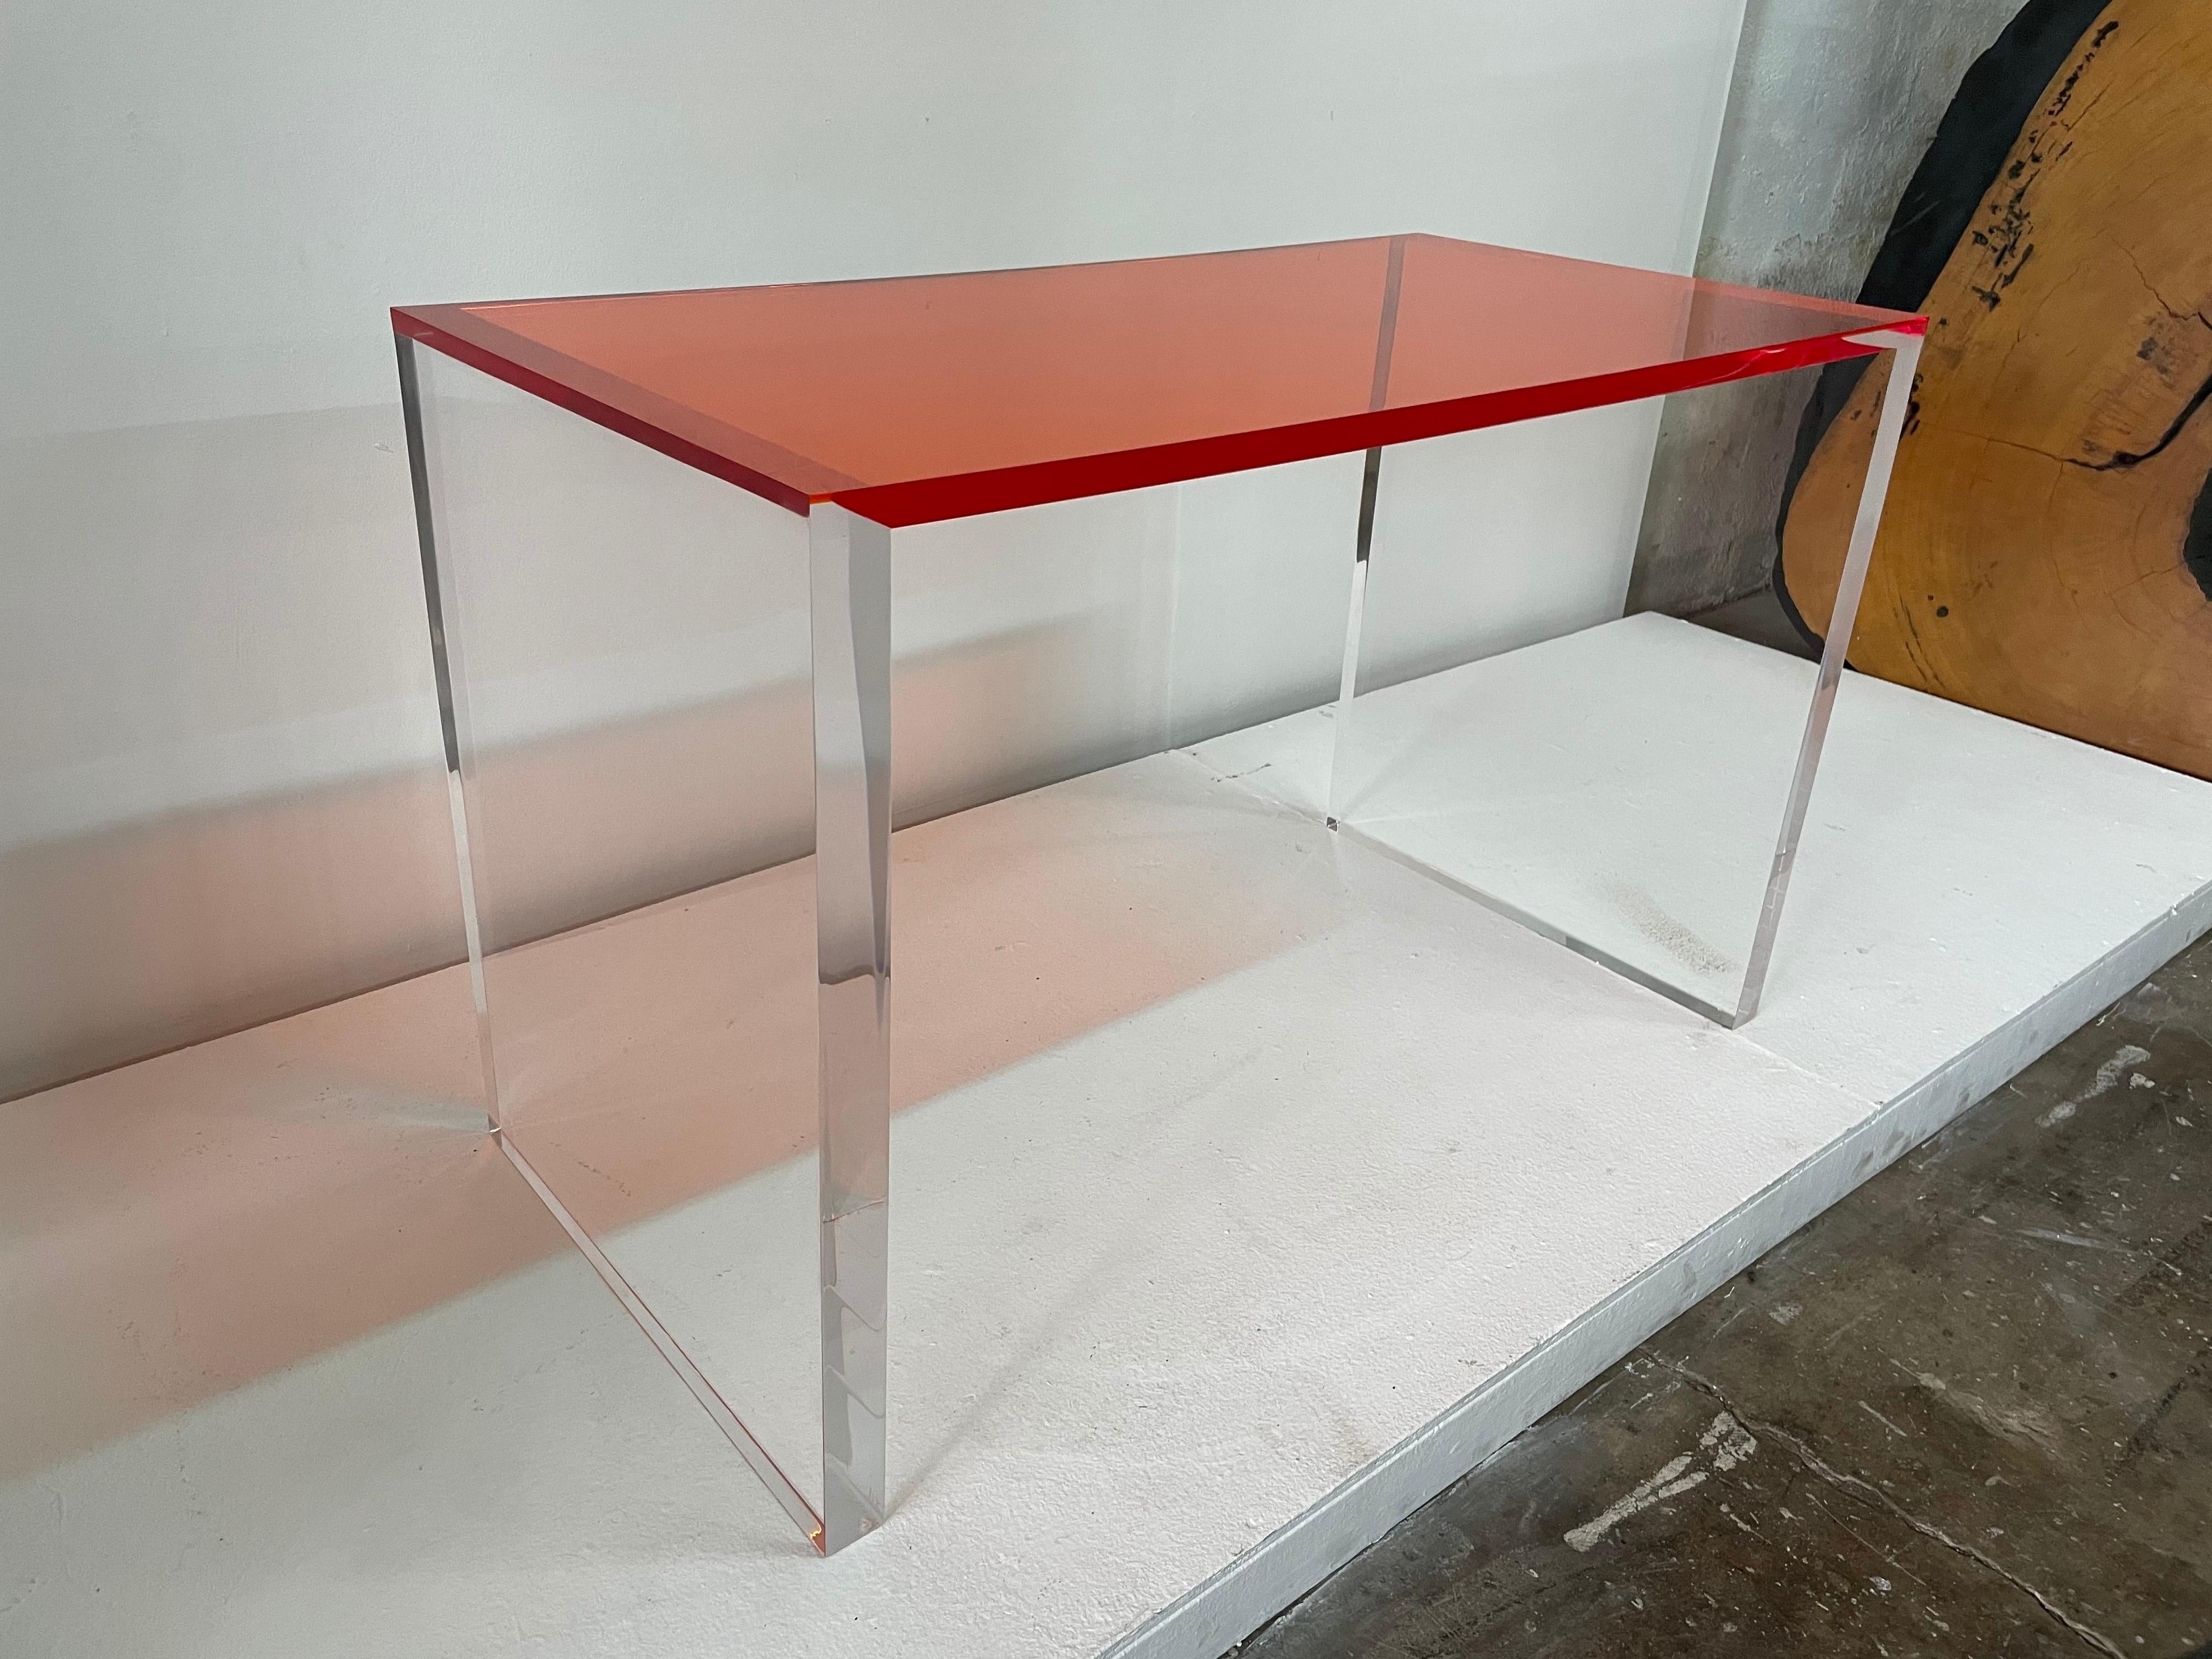 This waterfall design all acrylic desk or game table has perfect lines and scale, heavy and perfect for any space. The top is a VIVID orange and the side panels are 2 inches thick clear acrylic.